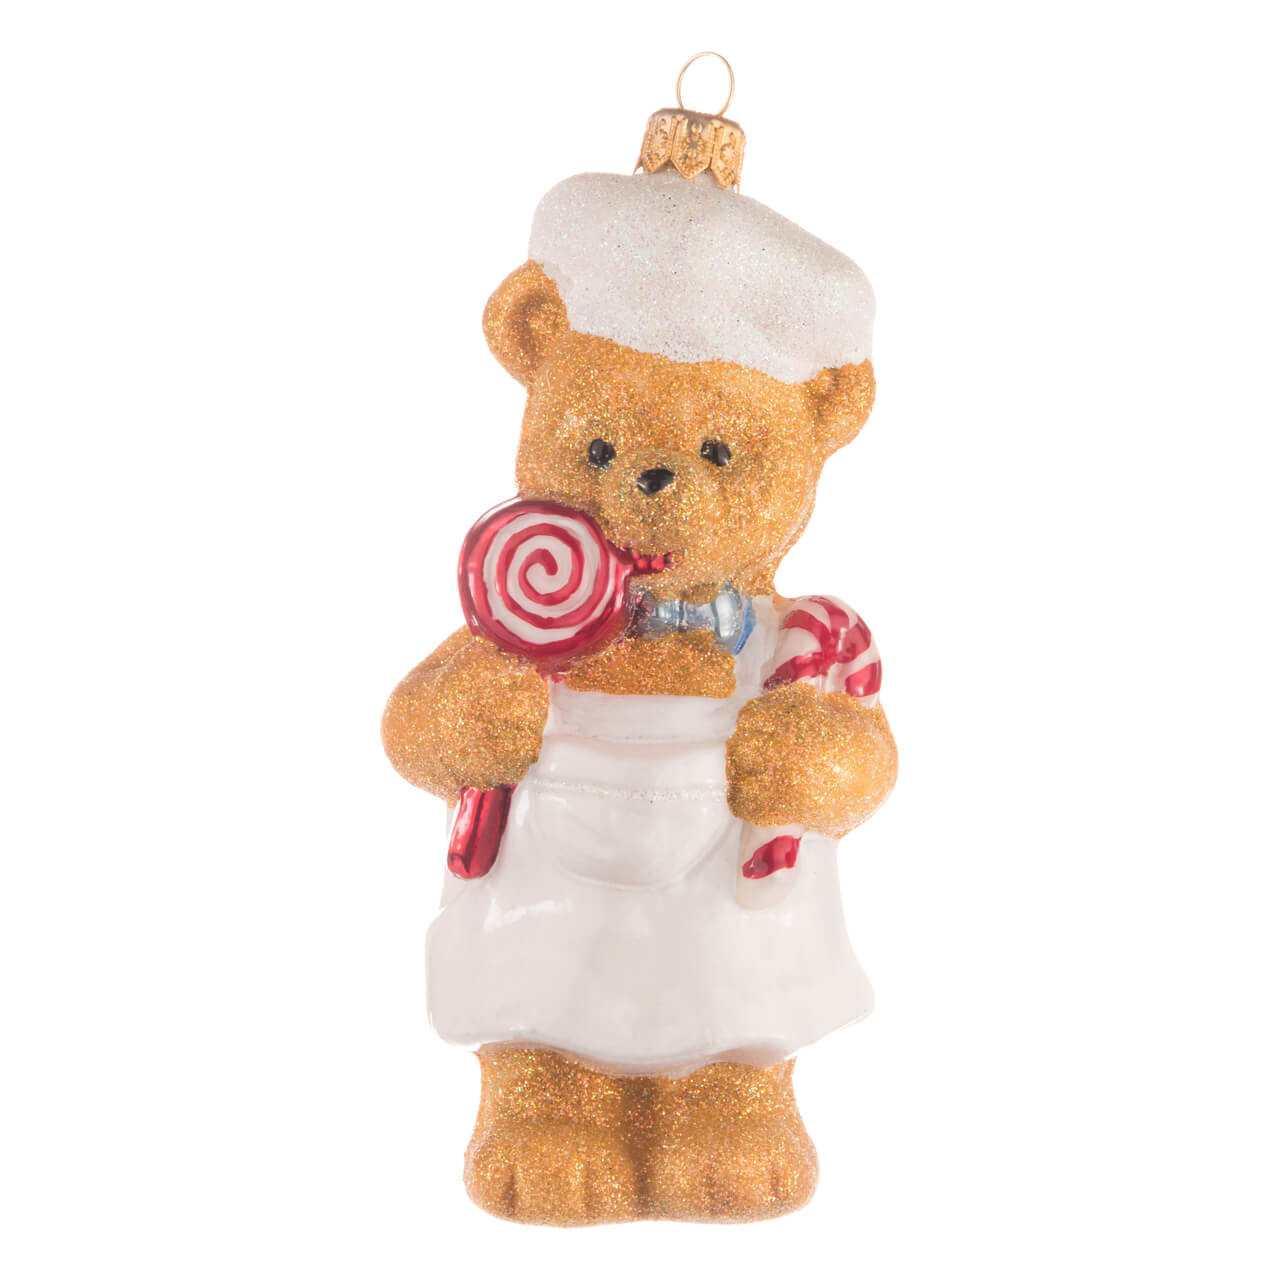 Confectioner's bear